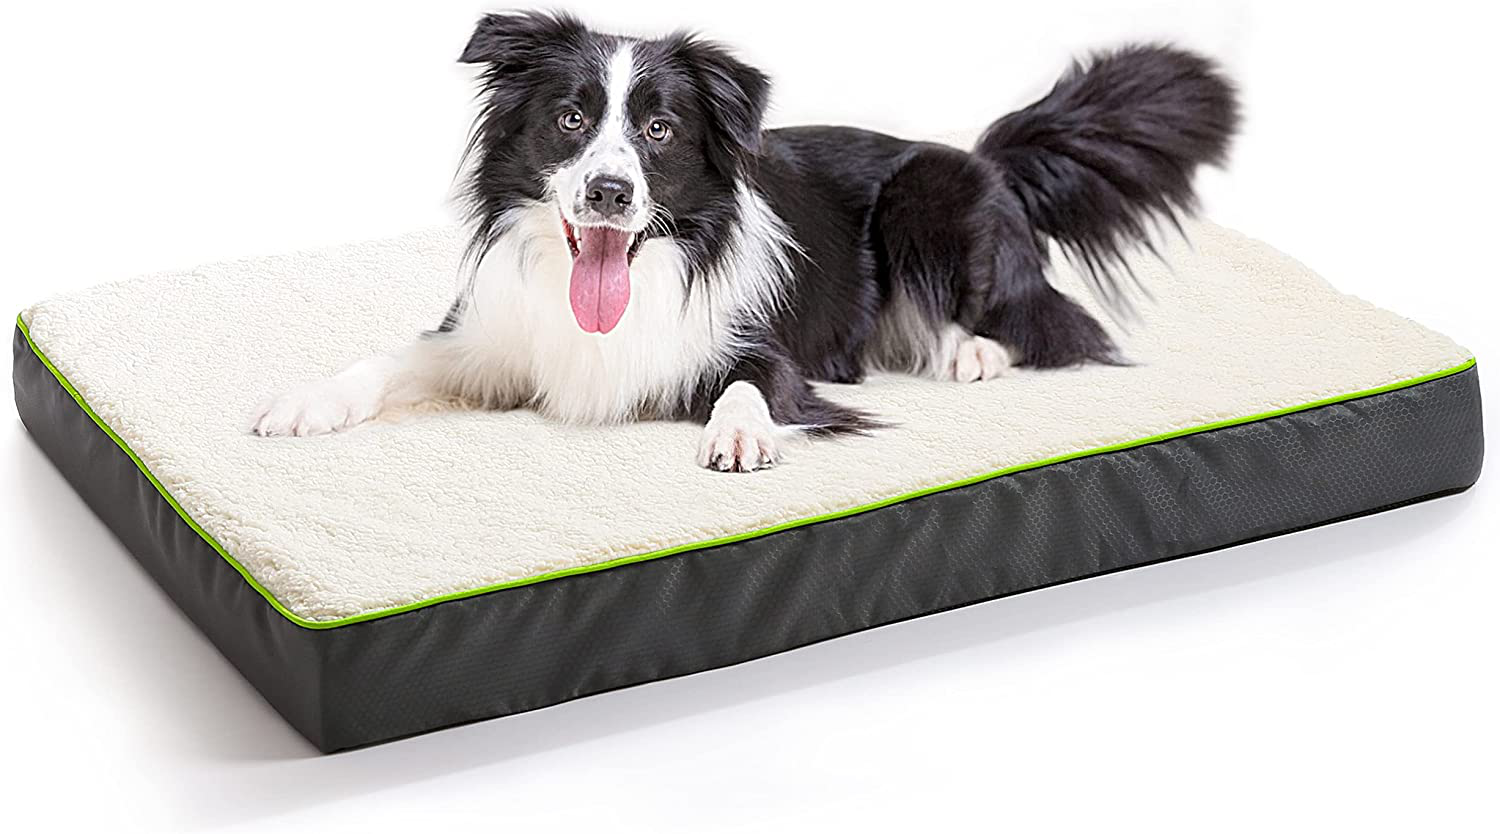 Hardy Buddy Oxford Egg Crate Foam Dog Bed for Small, Medium, Large Dogs, Thick Pet Bed Waterproof Mattress with Removable Washable Cover, Non-Slip Bottom